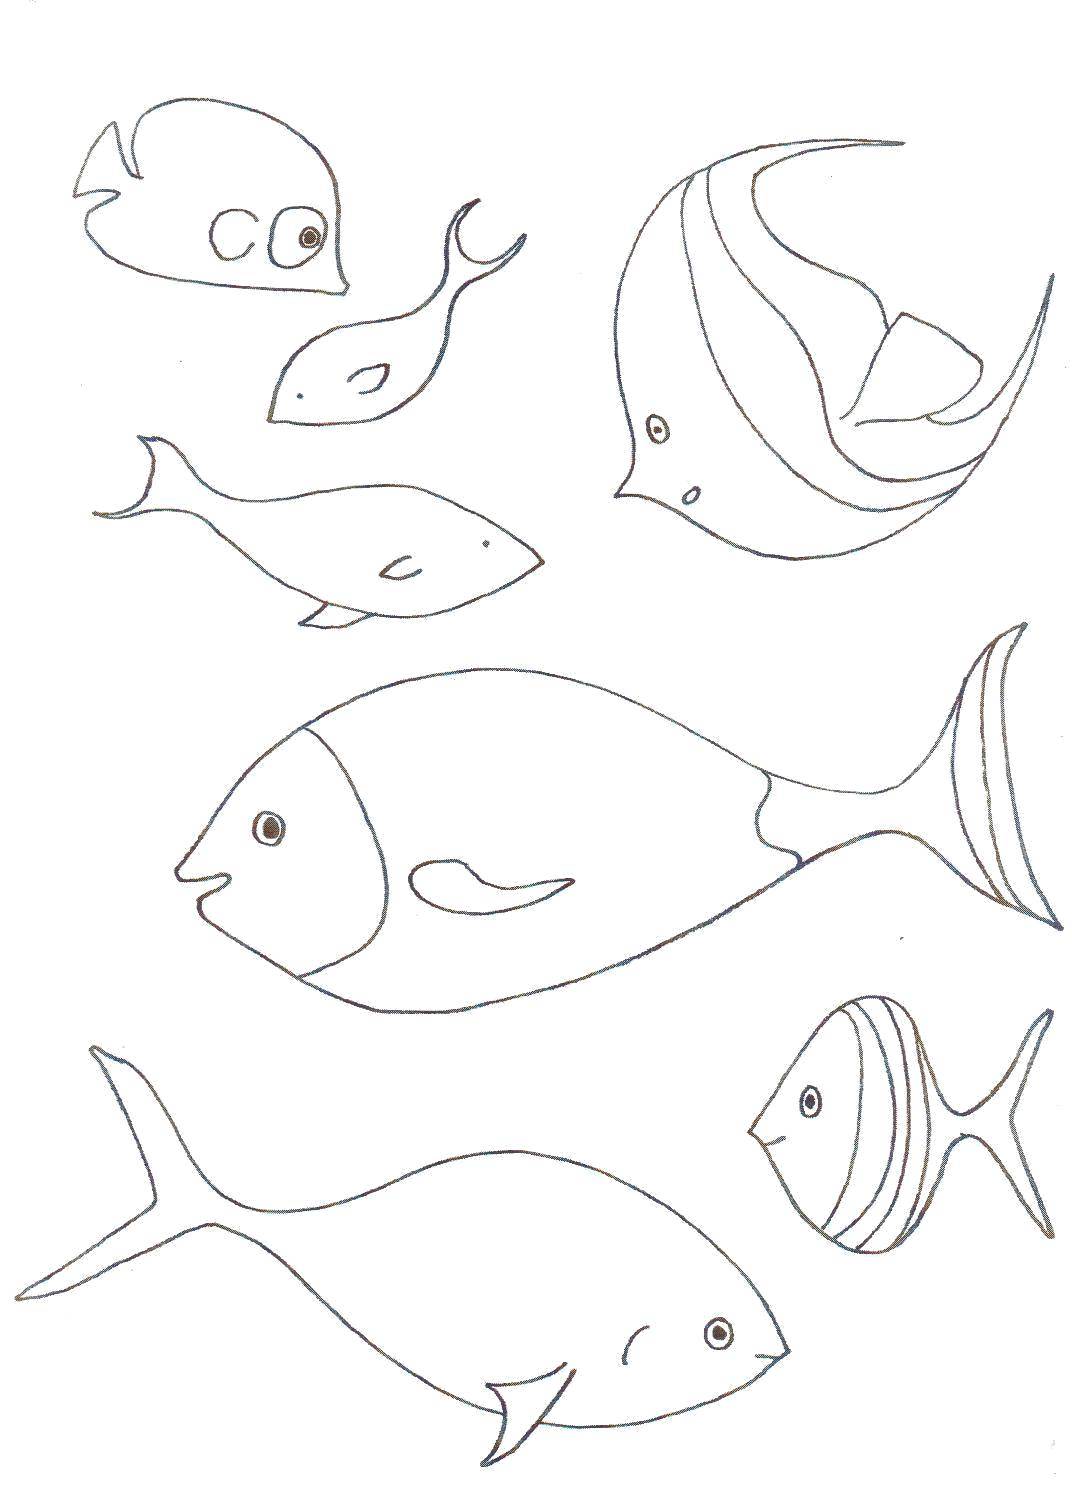 Coloring Different species of fish. Category fish. Tags:  Fish, water, underwater.